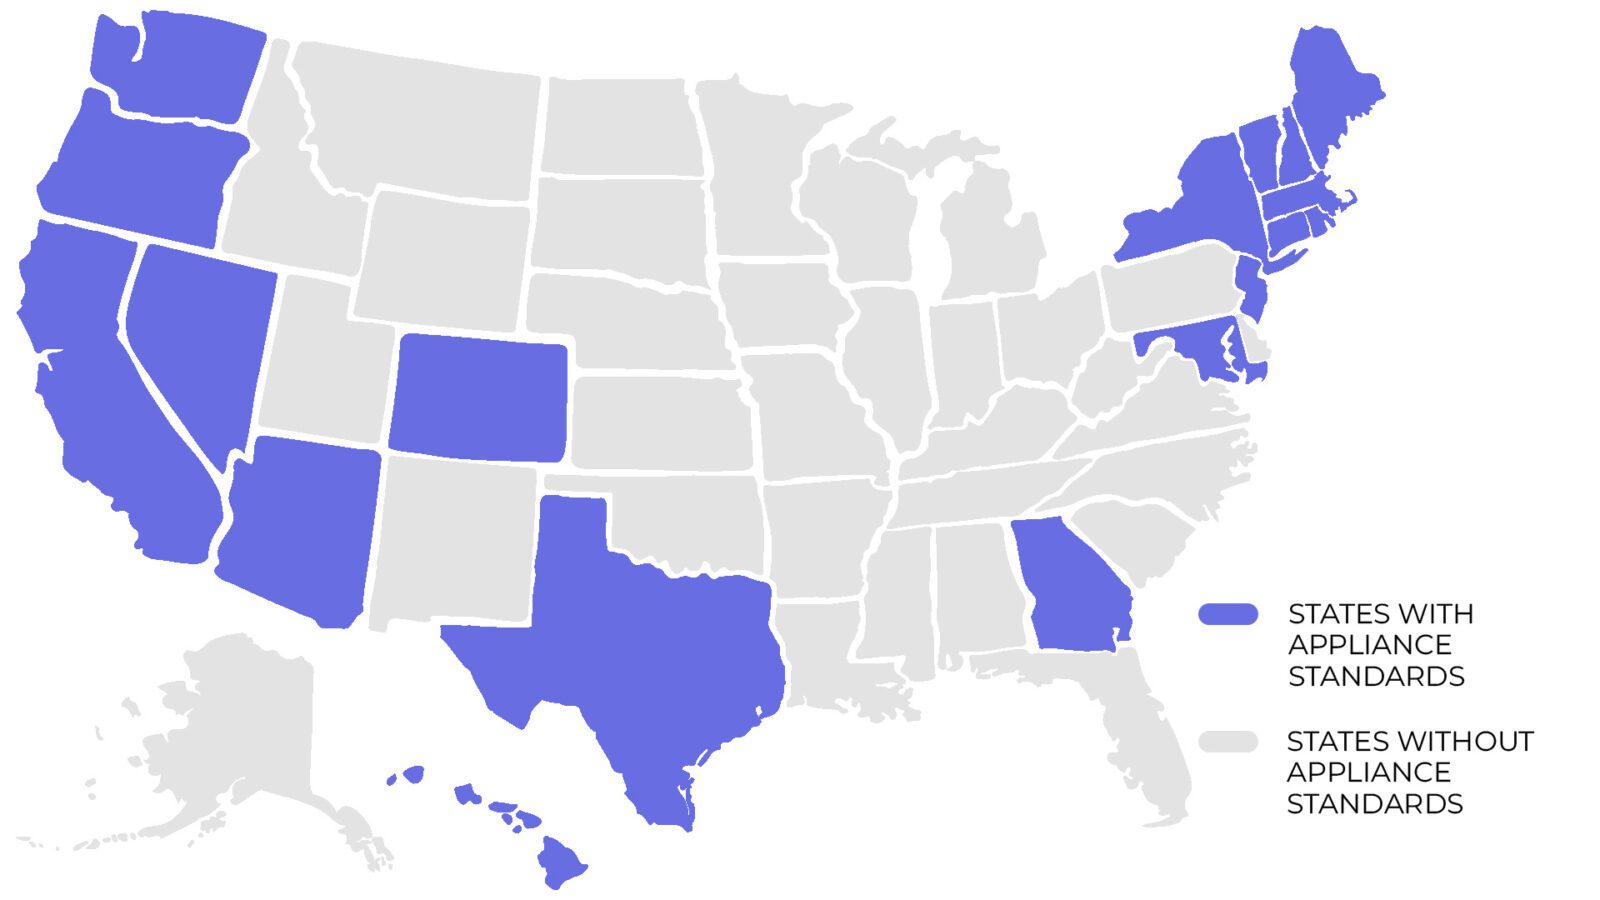 Map of the U.S. with states that have passed appliance standards highlighted in purple.